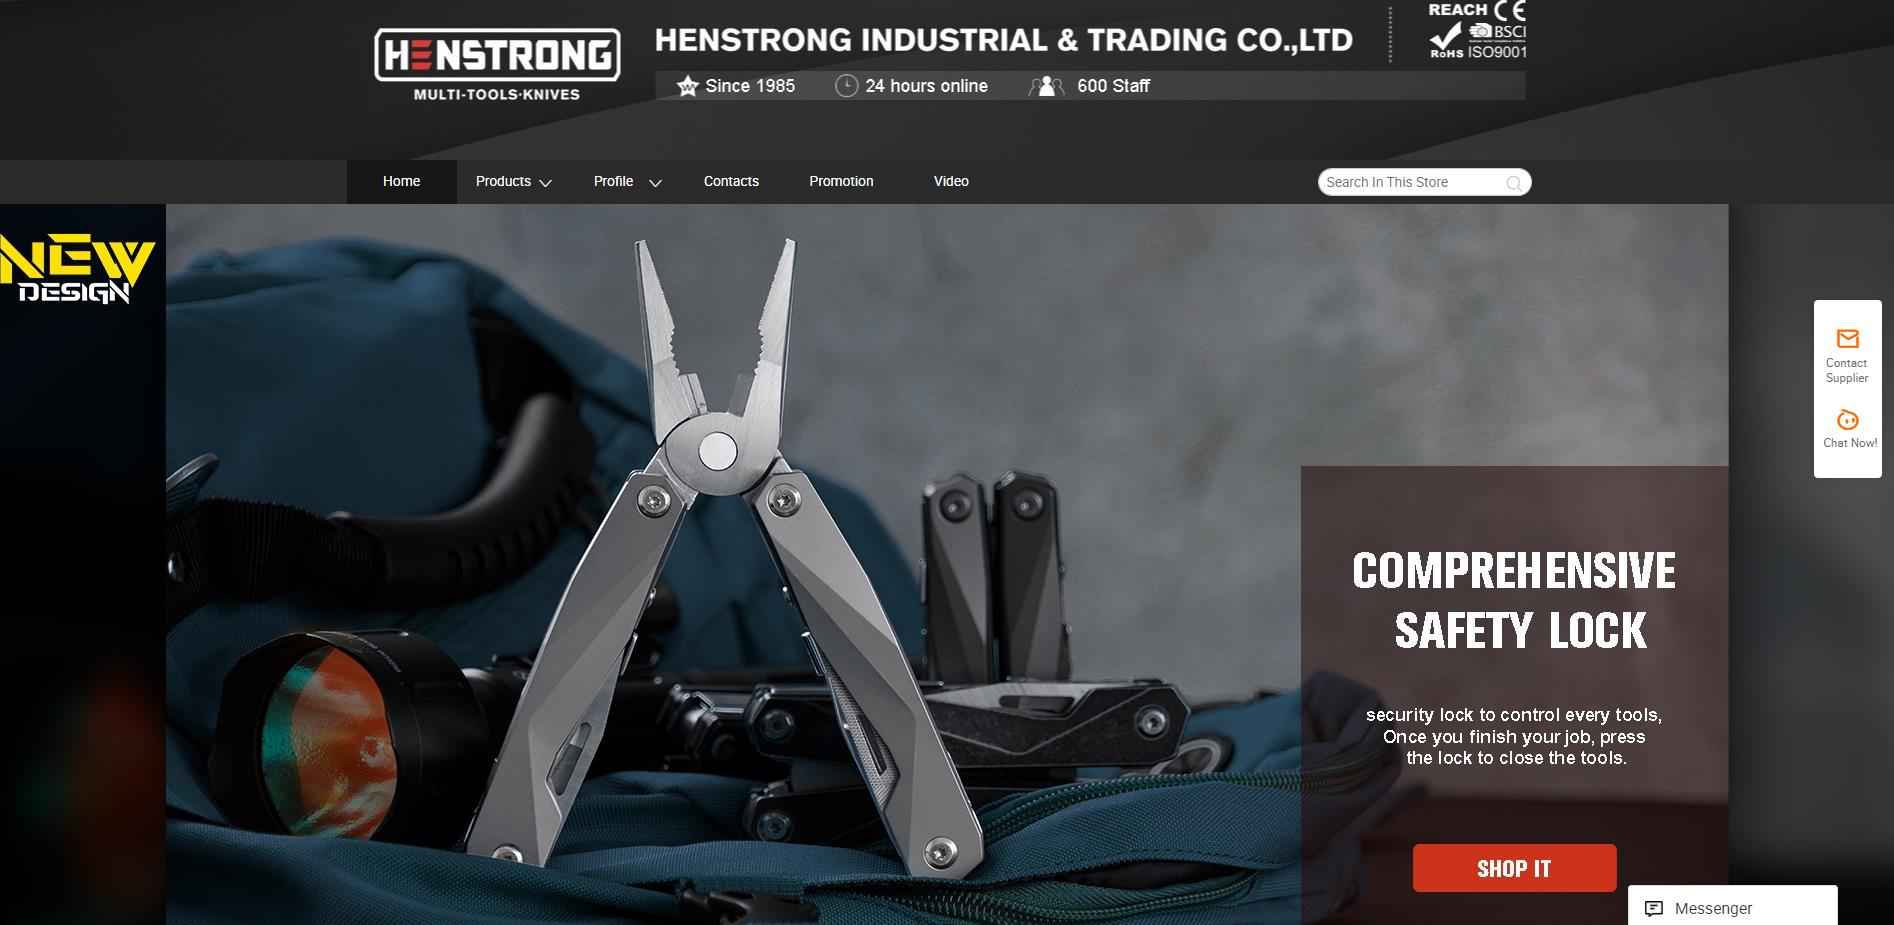 Henstrong Industrial & Trading